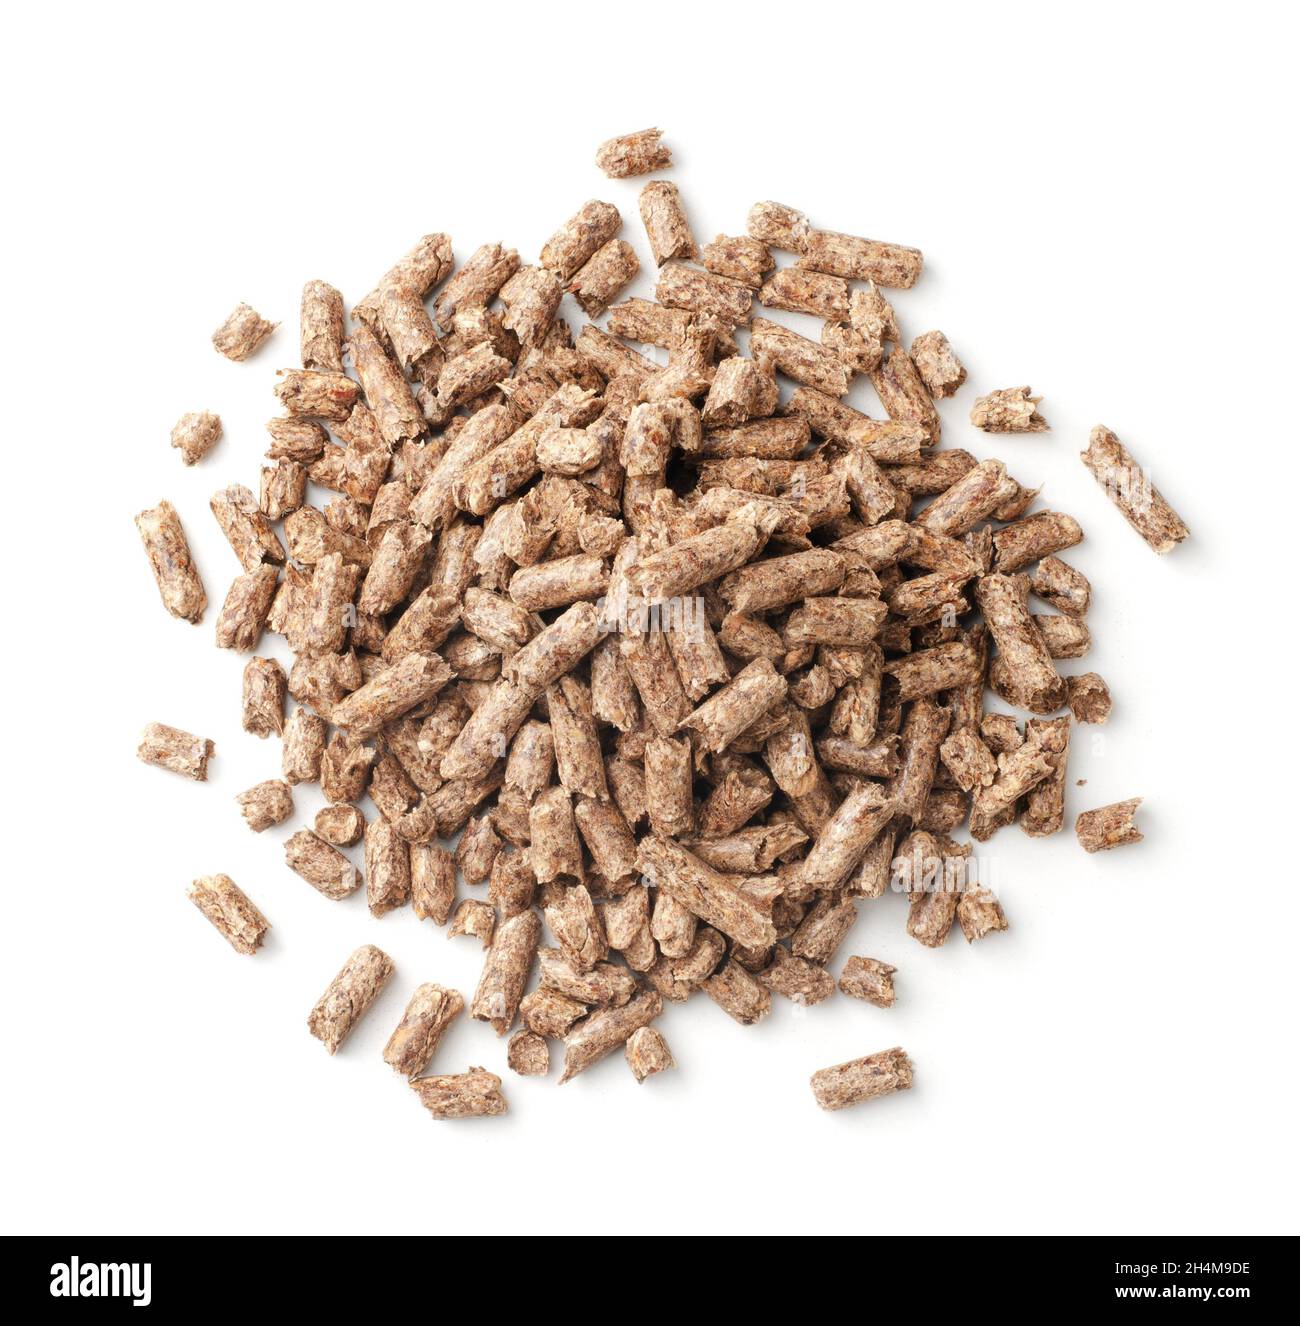 Close up on a pile of compressed wood pellets for use as an eco-friendly renewable organic biofuel or mulch in the garden over a white background. Top Stock Photo